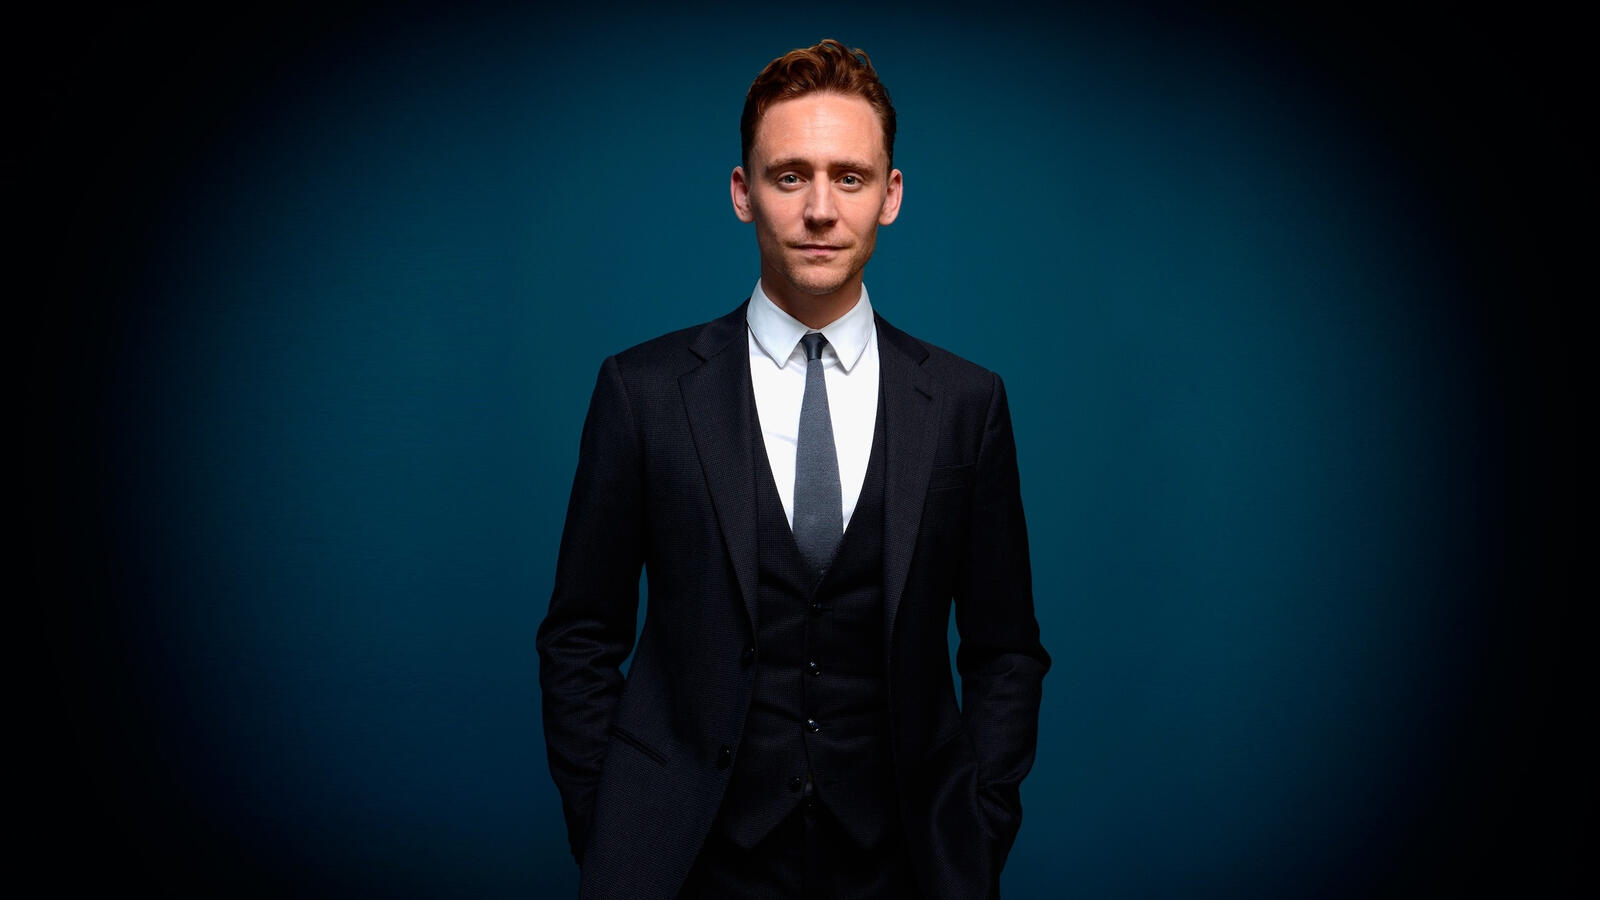 Free photo Tom Hiddleston in a suit against a dark blue background